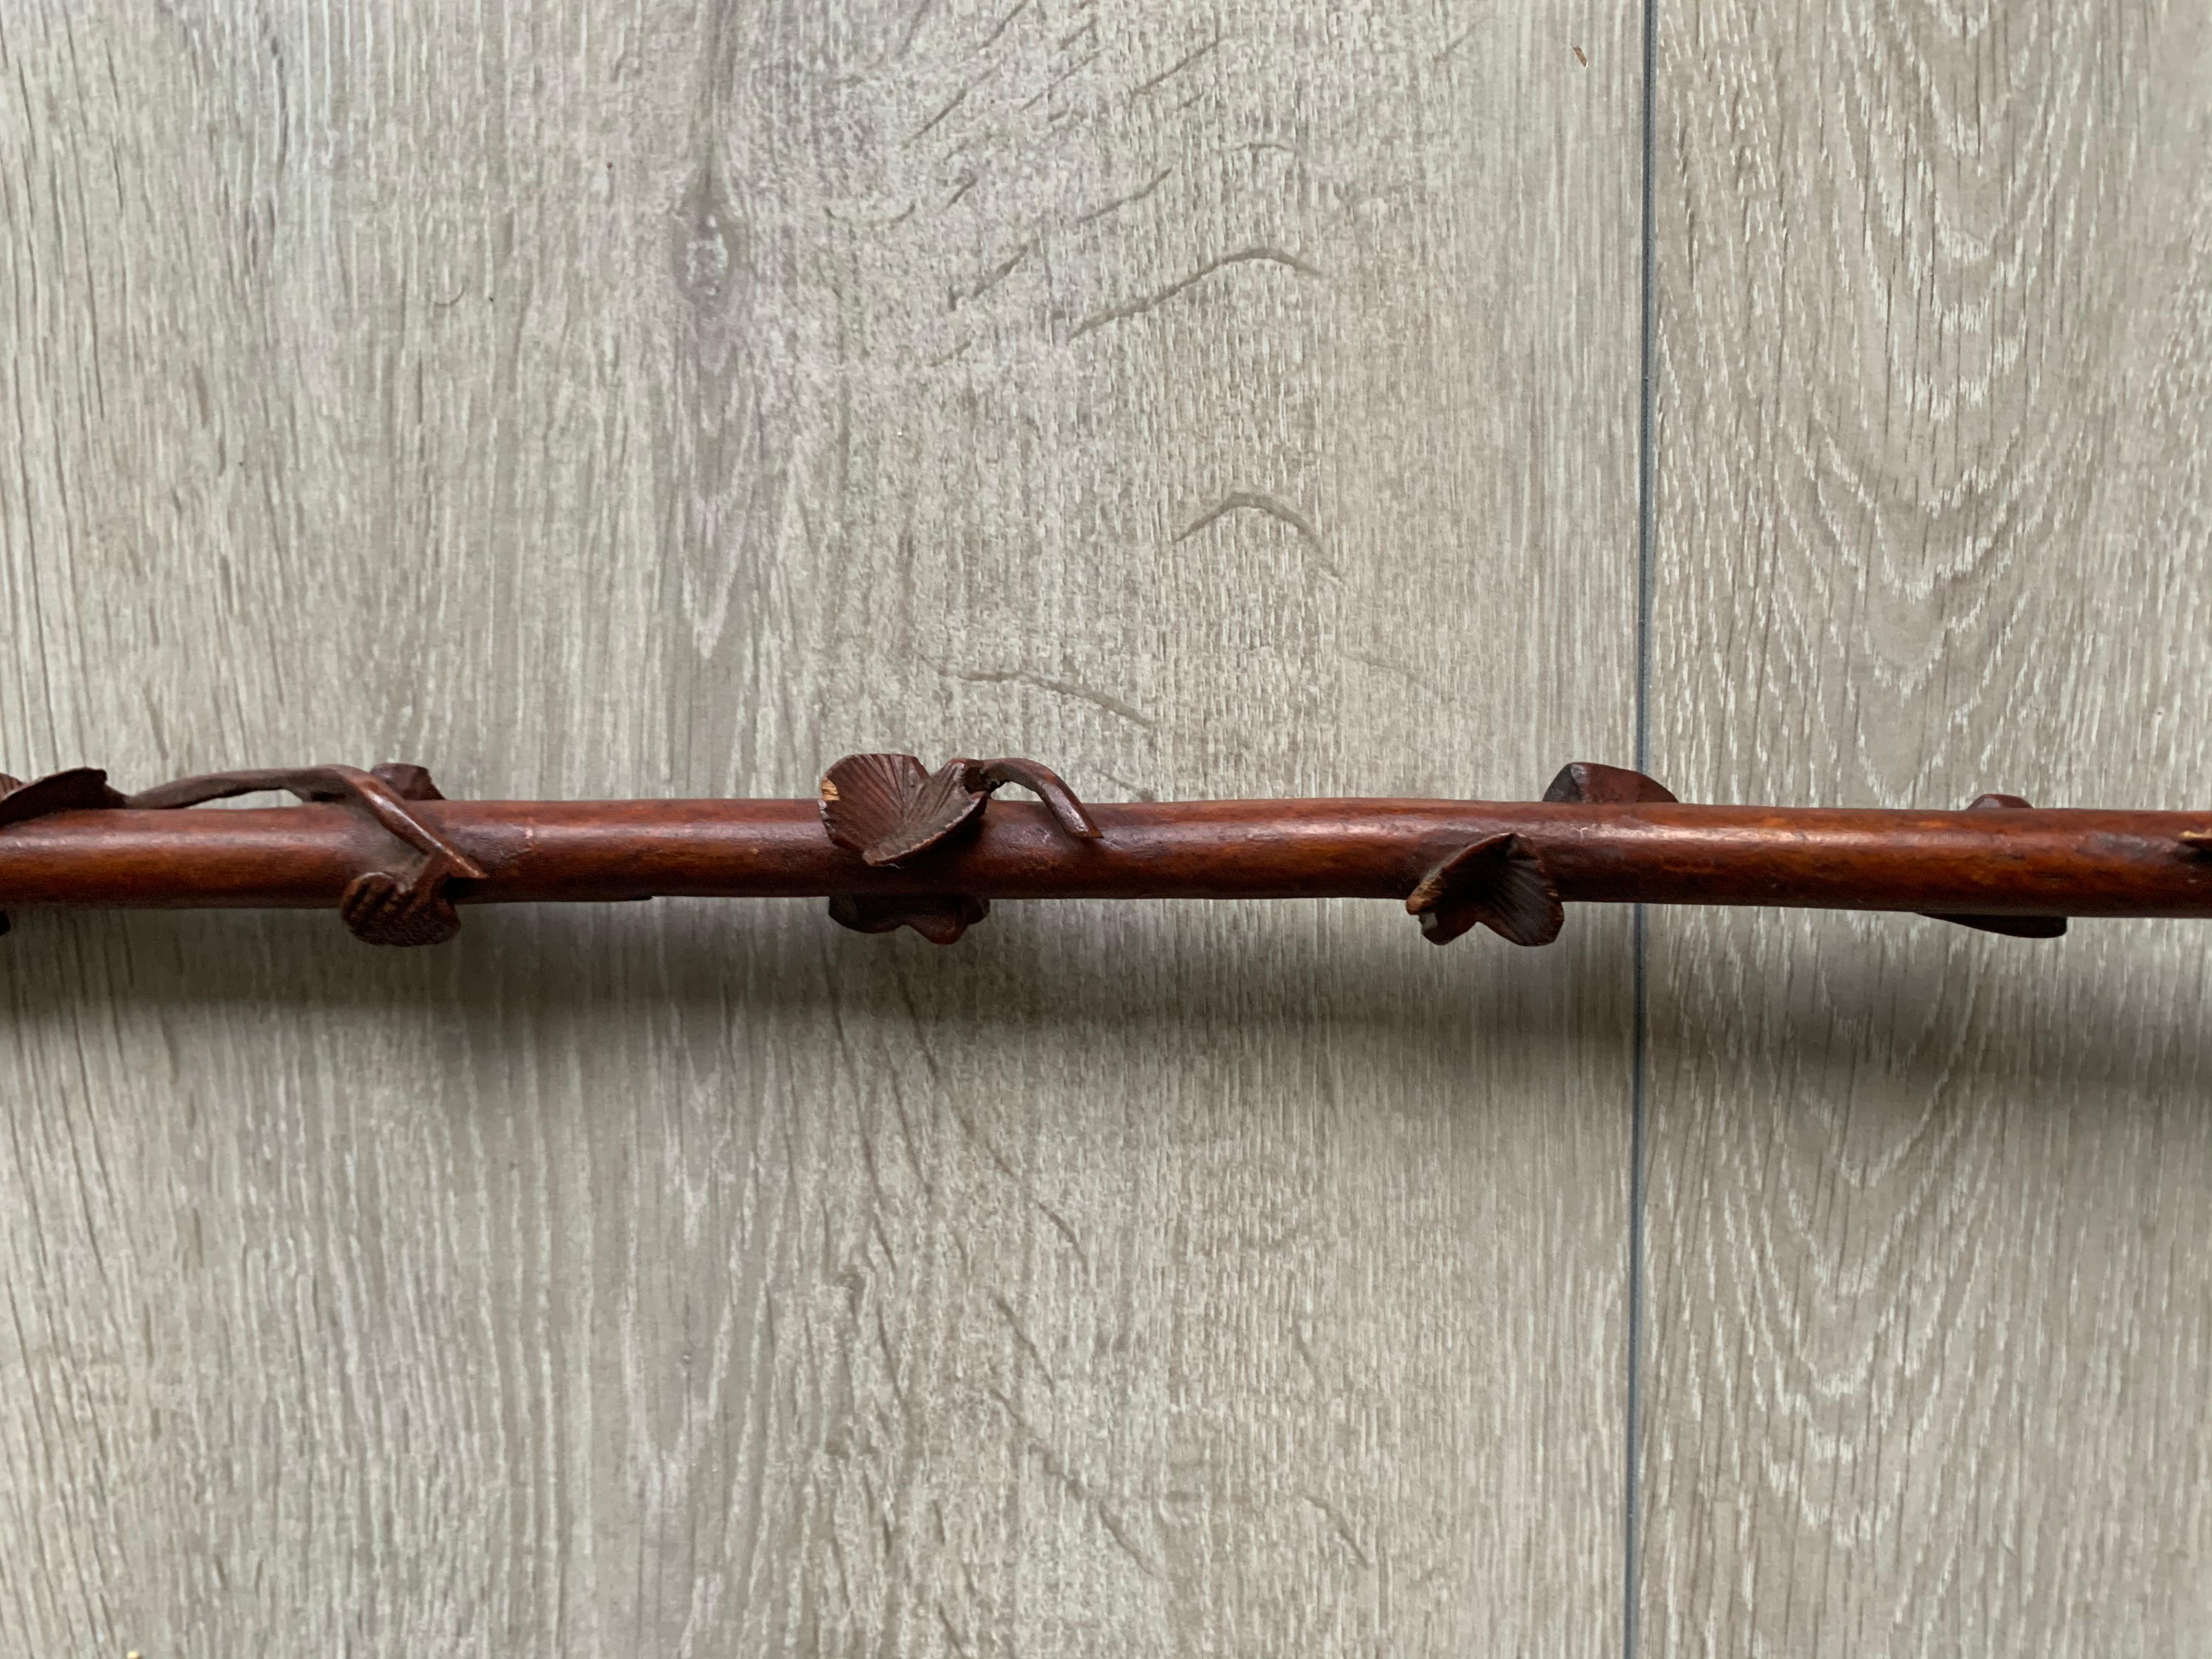 Rare and skillfully hand carved Folk Art walking cane.

This stylish and practical walking stick with a dog's head carved on the handle is another one of our recent great finds. This one of a kind cane is not only made as a display piece, it is